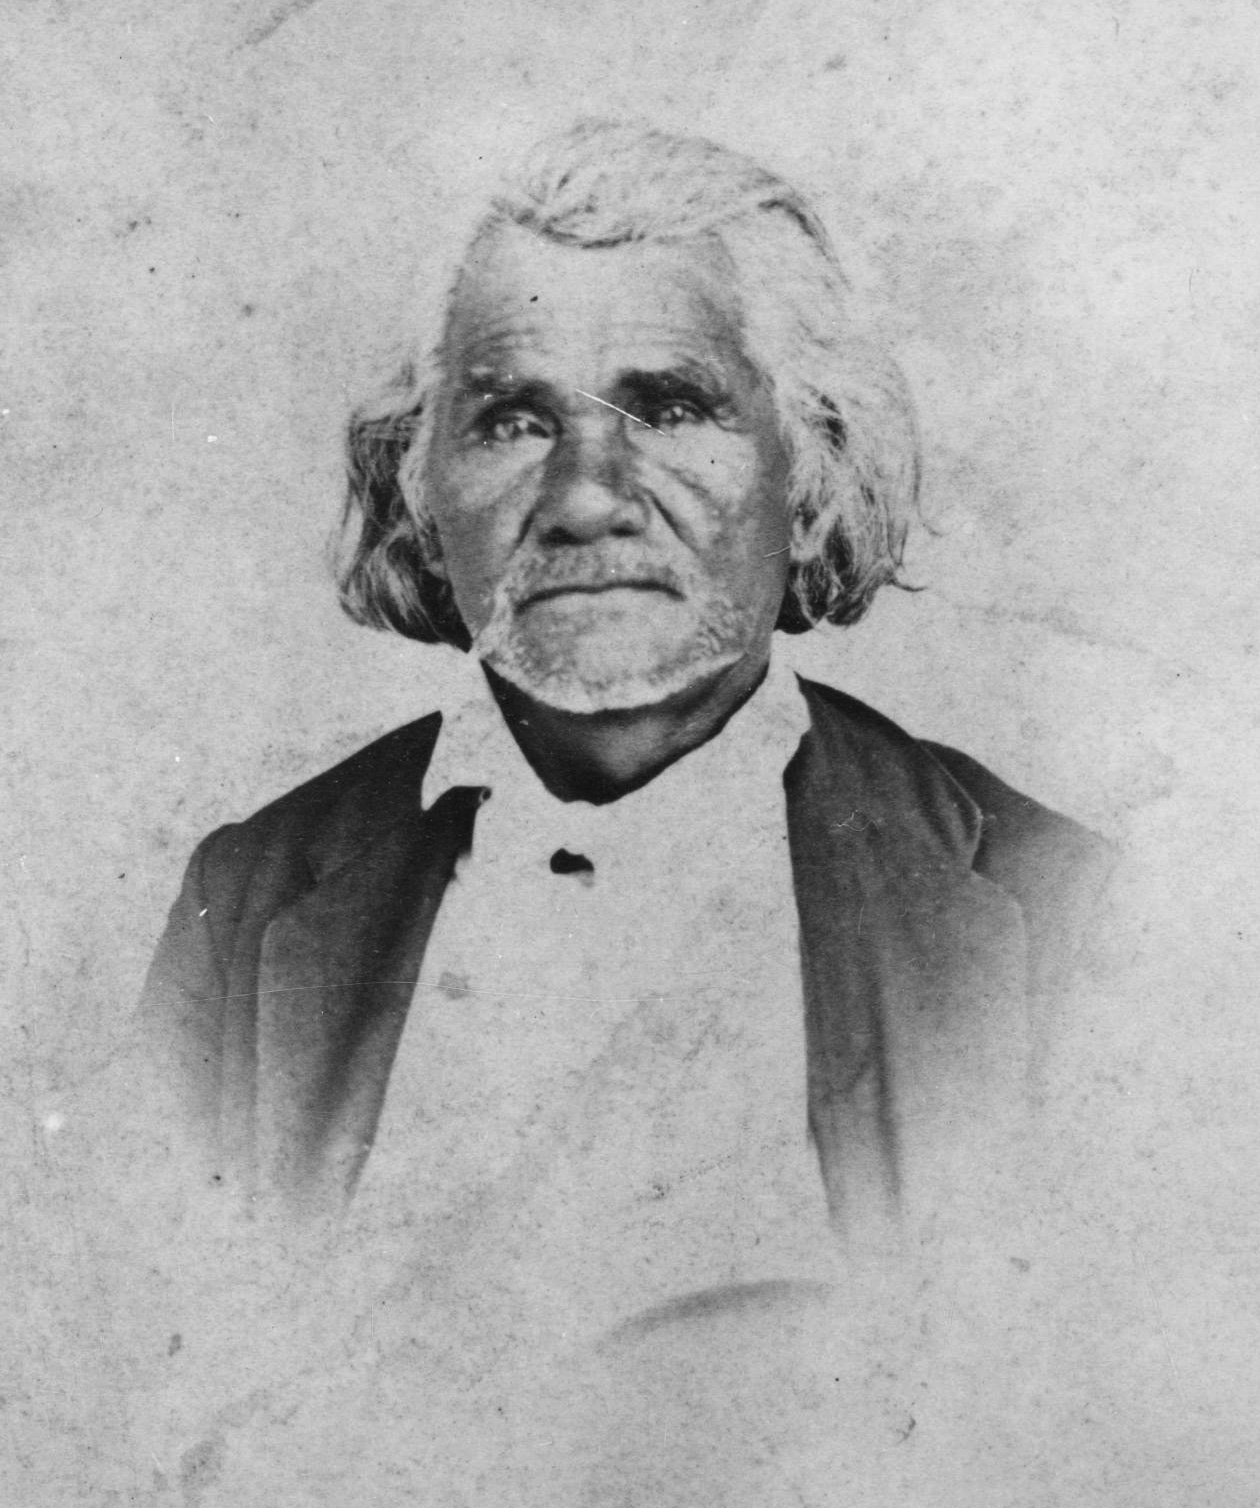 watie-stand-the-encyclopedia-of-oklahoma-history-and-culture